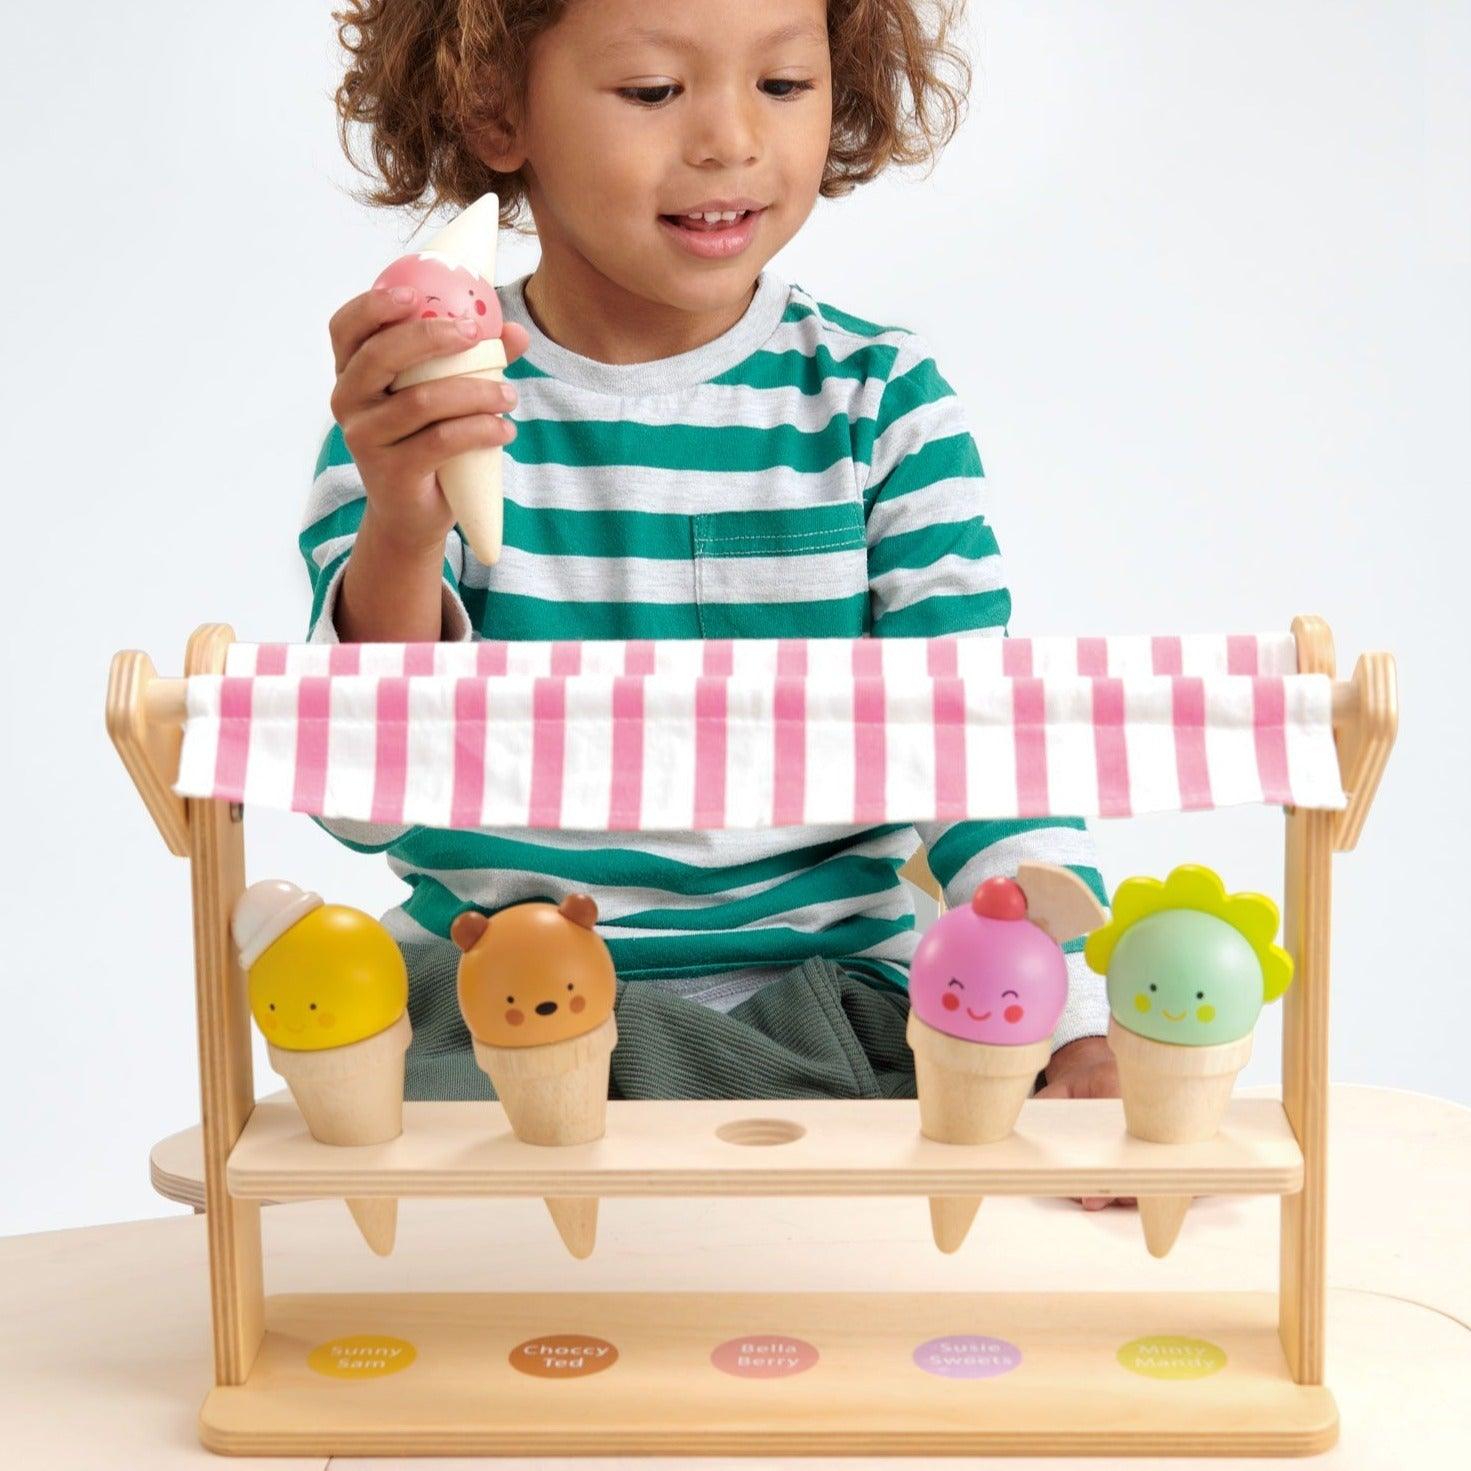 Tender Leaf Toys: wooden ice cream shop Ice Scoops & Smiles